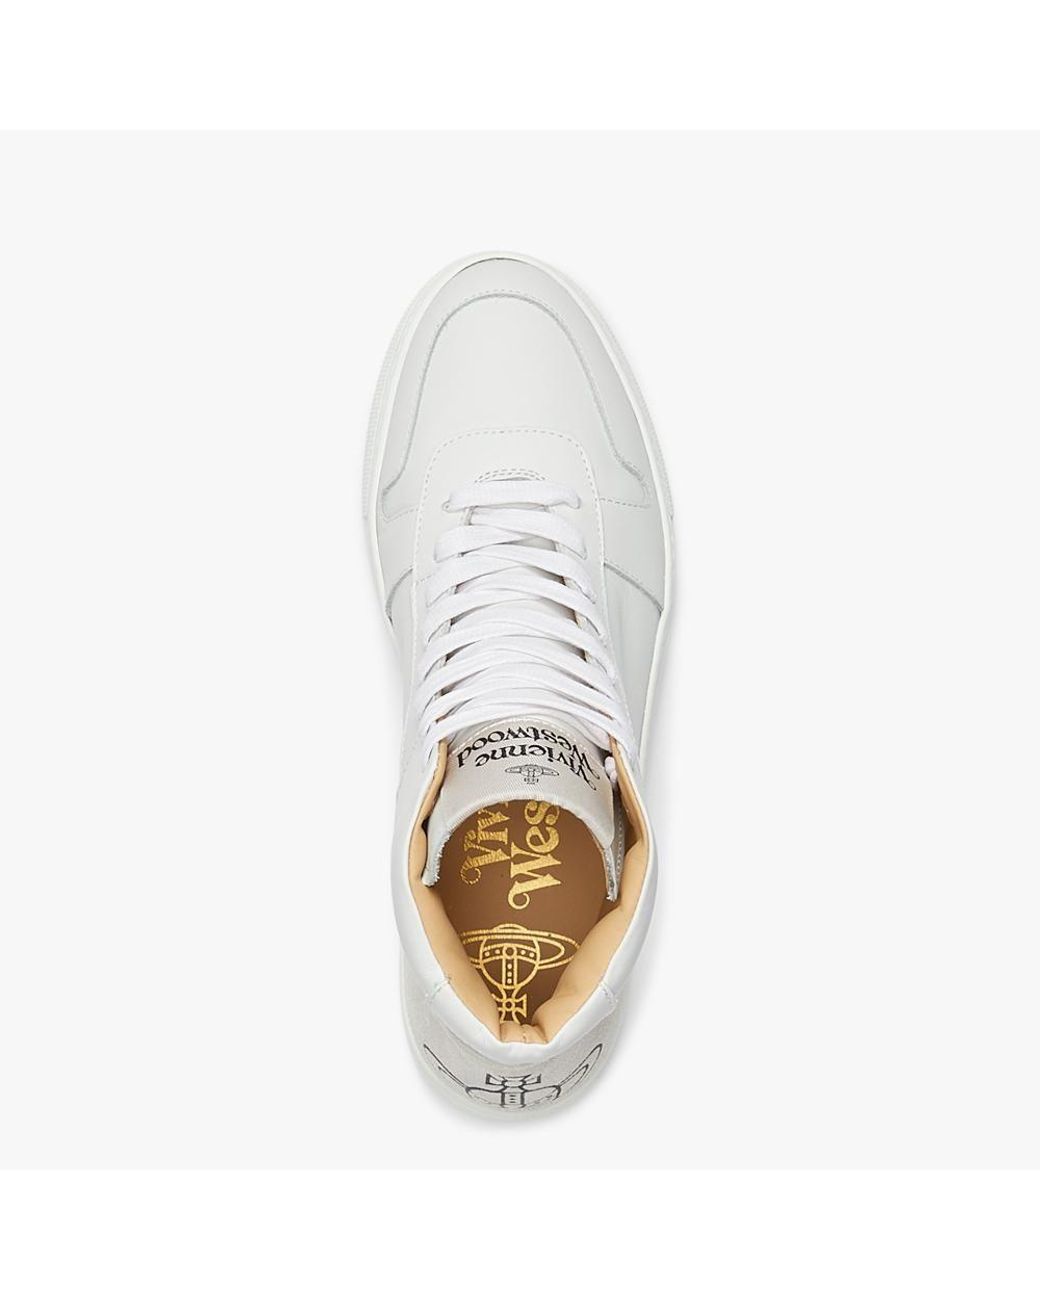 Vivienne Westwood Leather Apollo White Sneakers - Save 3% - Lyst